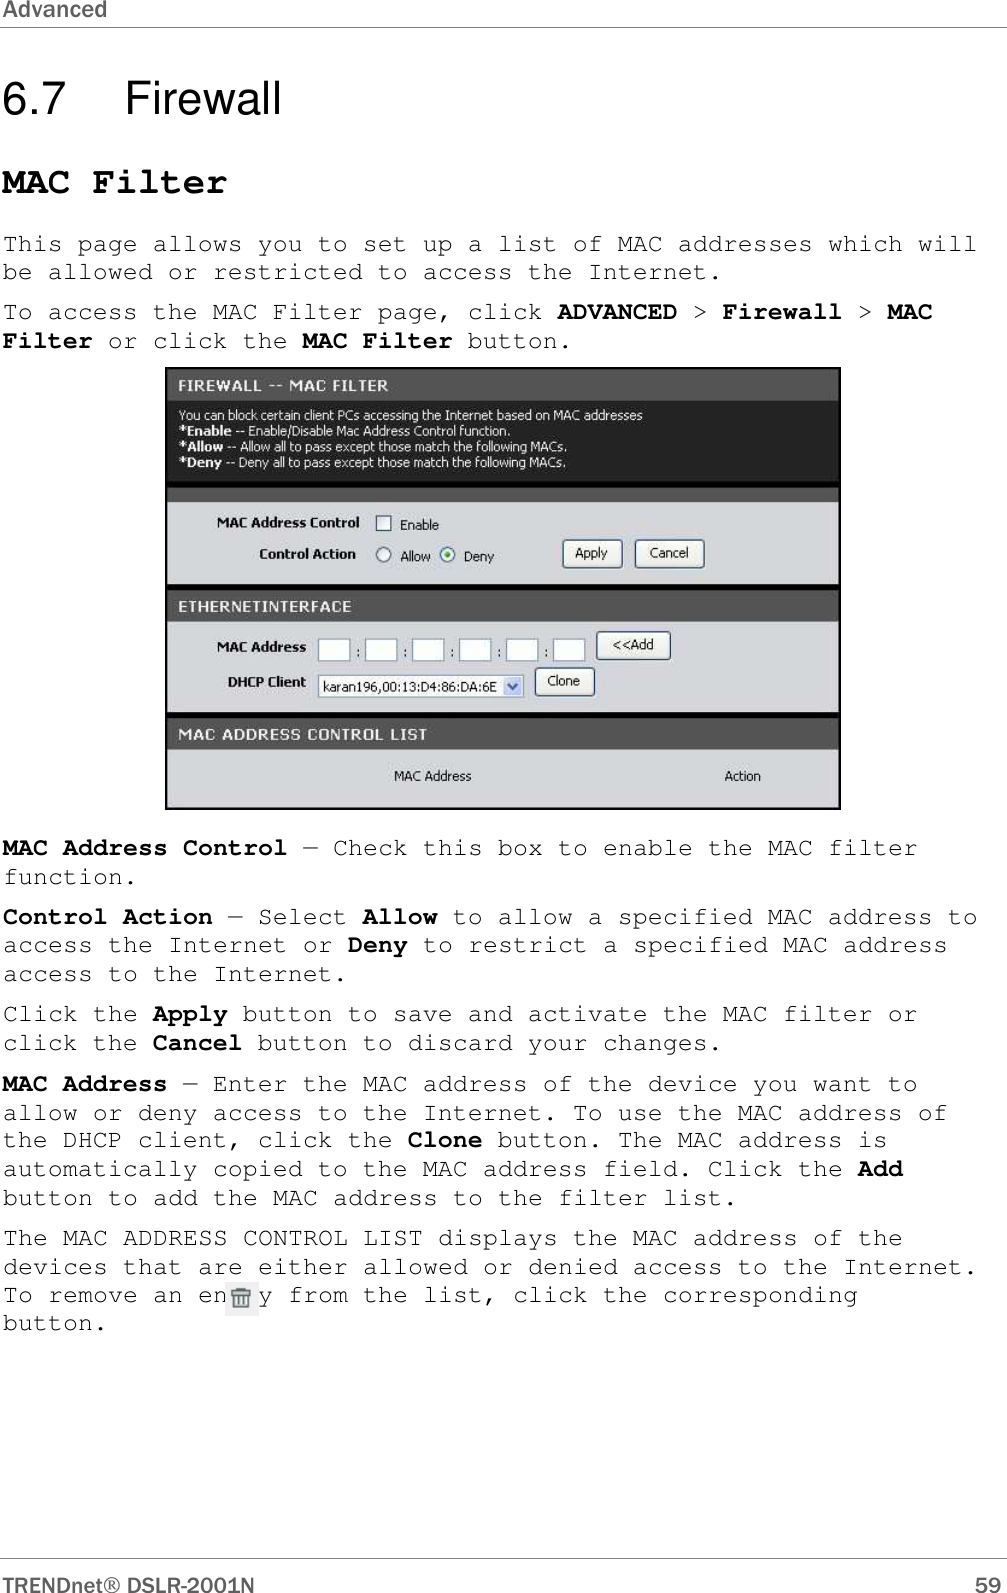 Advanced      TRENDnet DSLR-2001N        59 6.7  Firewall MAC Filter This page allows you to set up a list of MAC addresses which will be allowed or restricted to access the Internet.  To access the MAC Filter page, click ADVANCED &gt; Firewall &gt; MAC Filter or click the MAC Filter button.  MAC Address Control — Check this box to enable the MAC filter function. Control Action — Select Allow to allow a specified MAC address to access the Internet or Deny to restrict a specified MAC address access to the Internet. Click the Apply button to save and activate the MAC filter or click the Cancel button to discard your changes. MAC Address — Enter the MAC address of the device you want to allow or deny access to the Internet. To use the MAC address of the DHCP client, click the Clone button. The MAC address is automatically copied to the MAC address field. Click the Add button to add the MAC address to the filter list. The MAC ADDRESS CONTROL LIST displays the MAC address of the devices that are either allowed or denied access to the Internet. To remove an entry from the list, click the corresponding       button.  